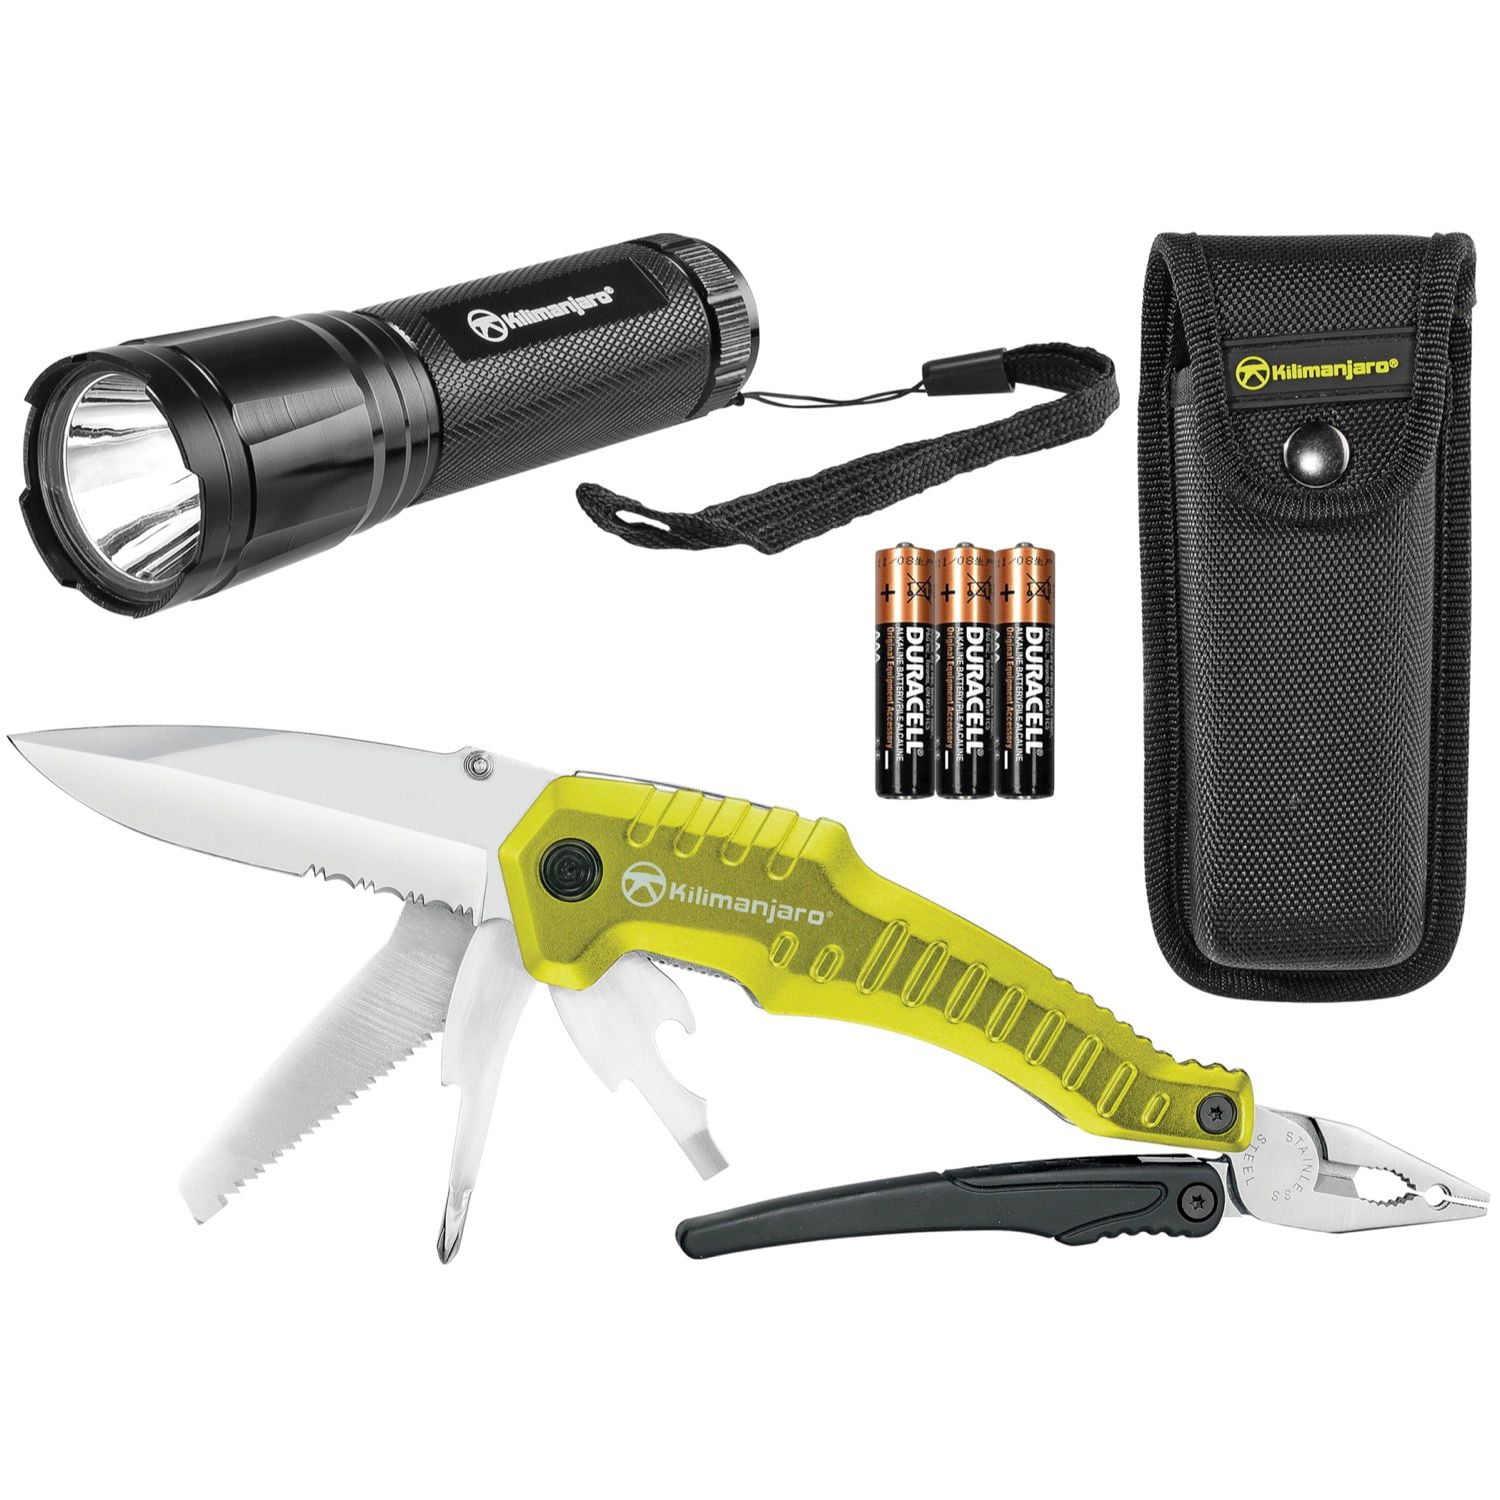 STANLEY® FATMAX® Auto-Retract Tri-Slide Safety Knife